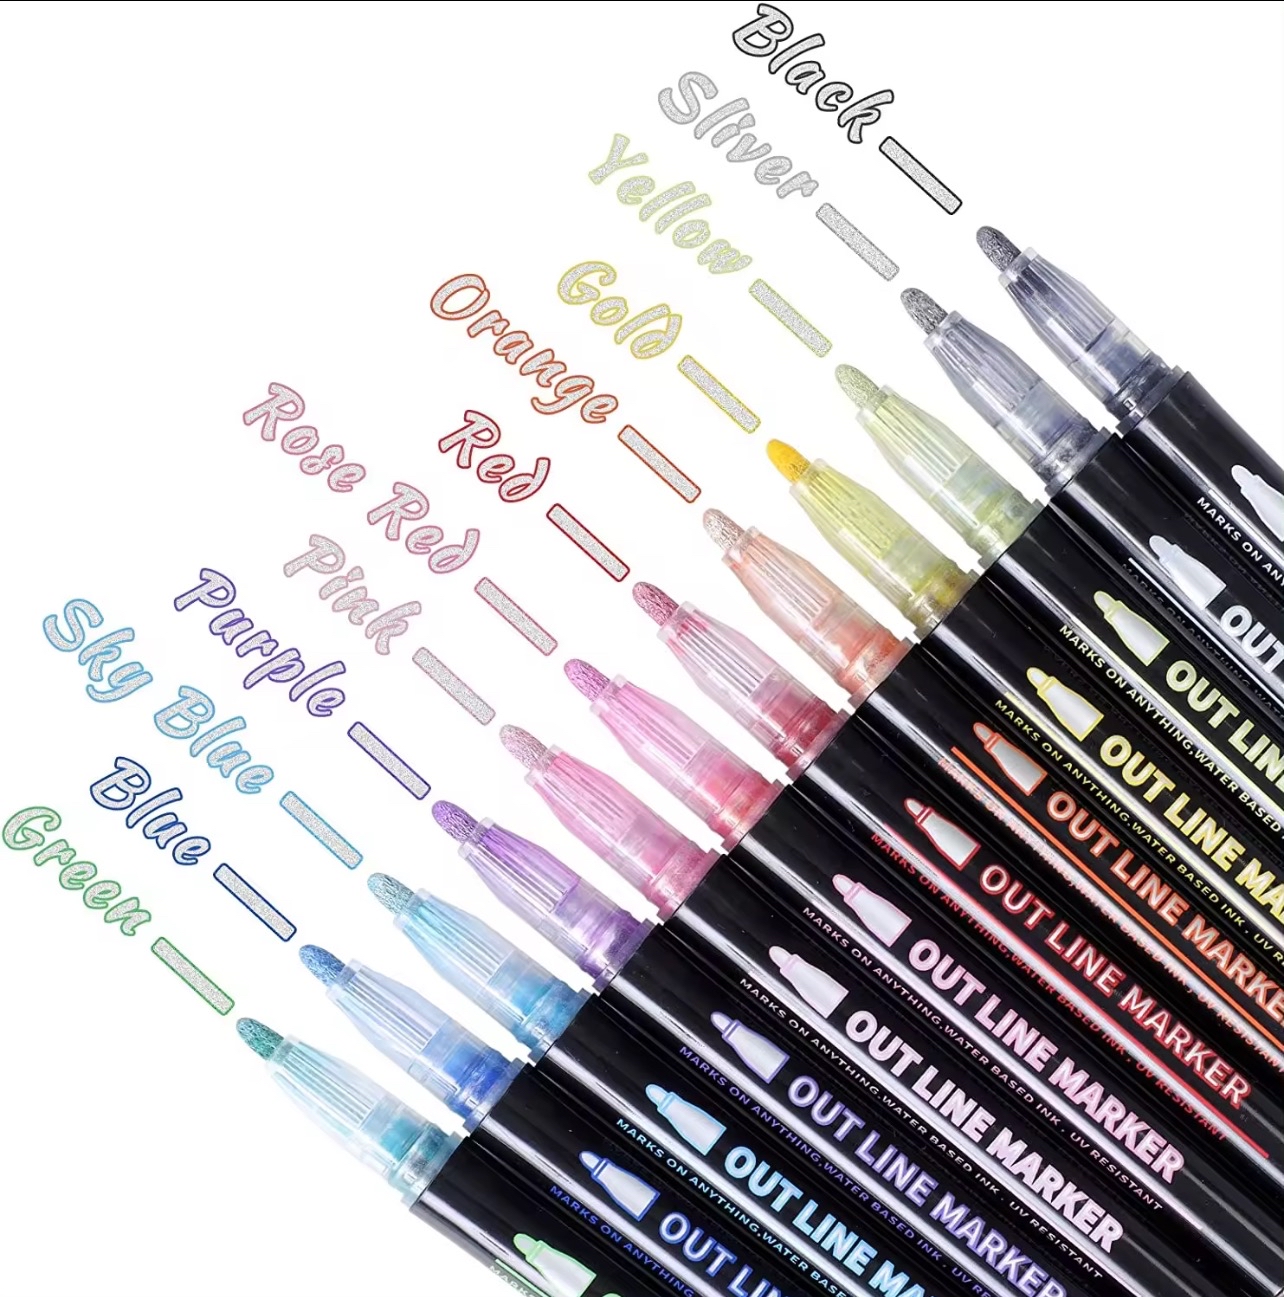 12 Colors Rainbow Pencils, 10 mm Thick Jumbo Colored Pencils for